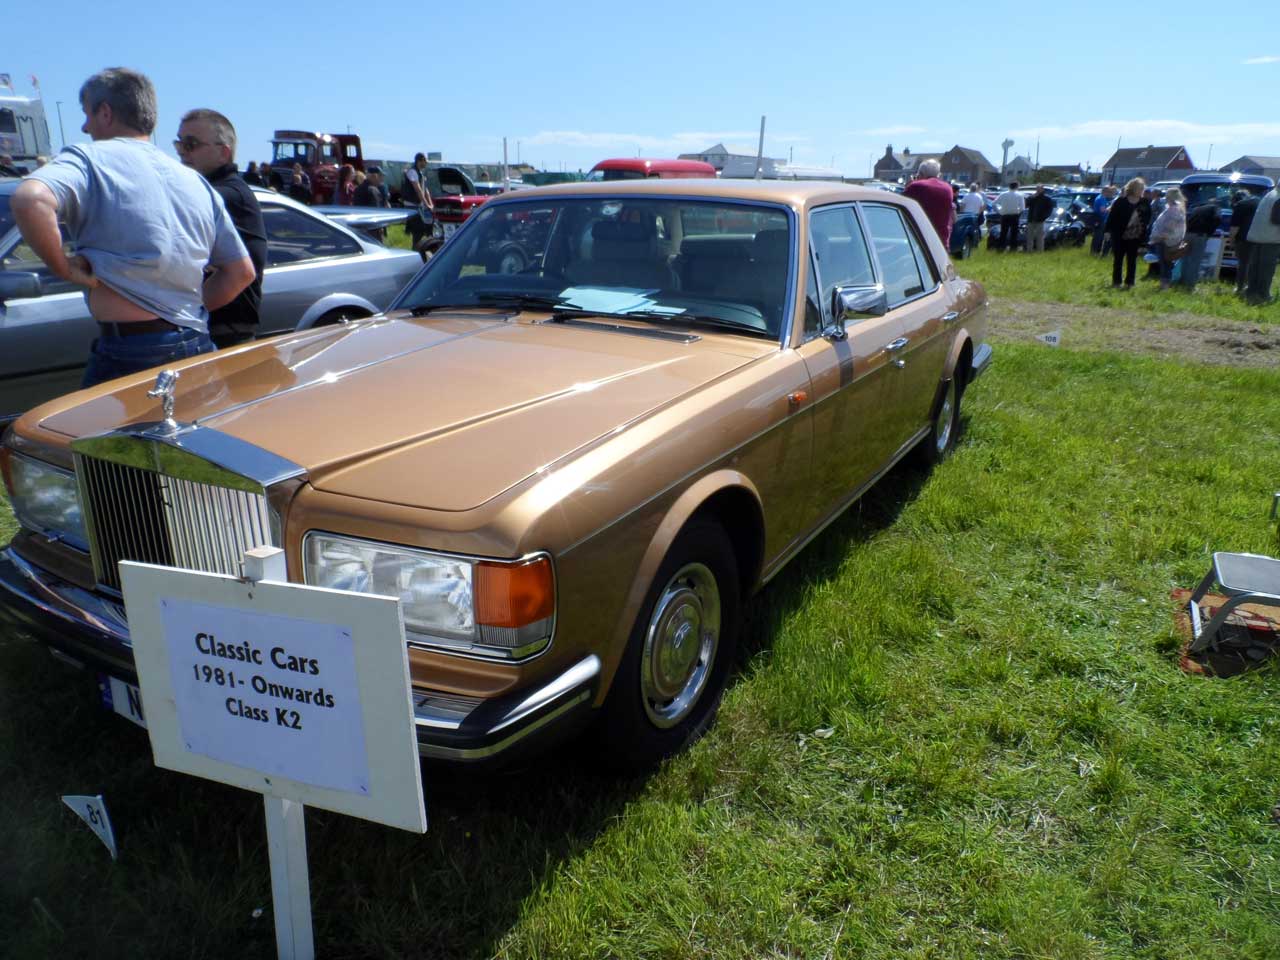 Photo: Caithness and Sutherland Vintage and Classic Vehicle Rally 2014